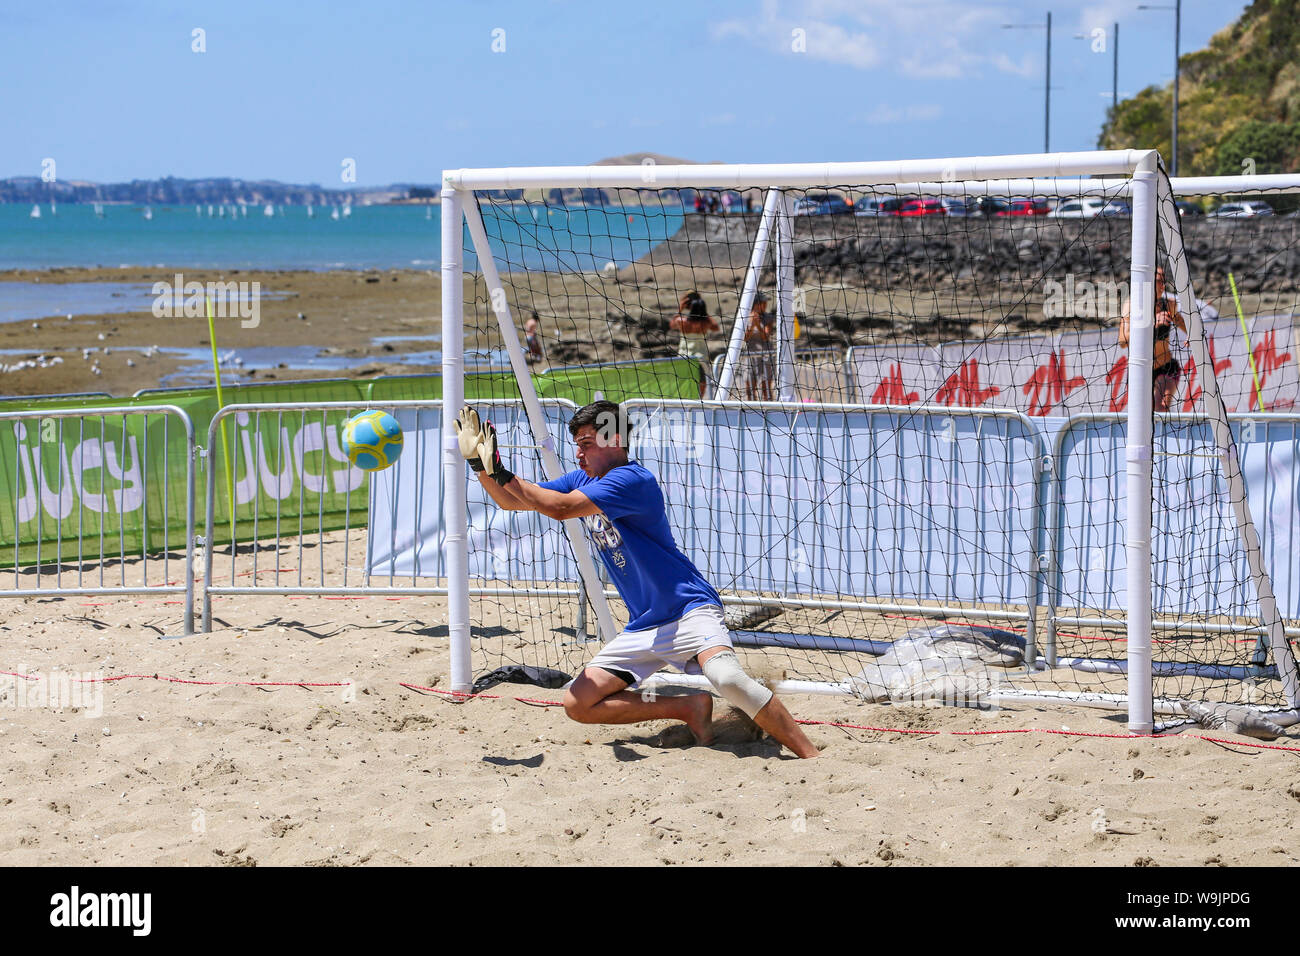 A young man making a save in a game of beach volleyball against a back drop of boats and yachts on the ocean in Misson Bay. Stock Photo